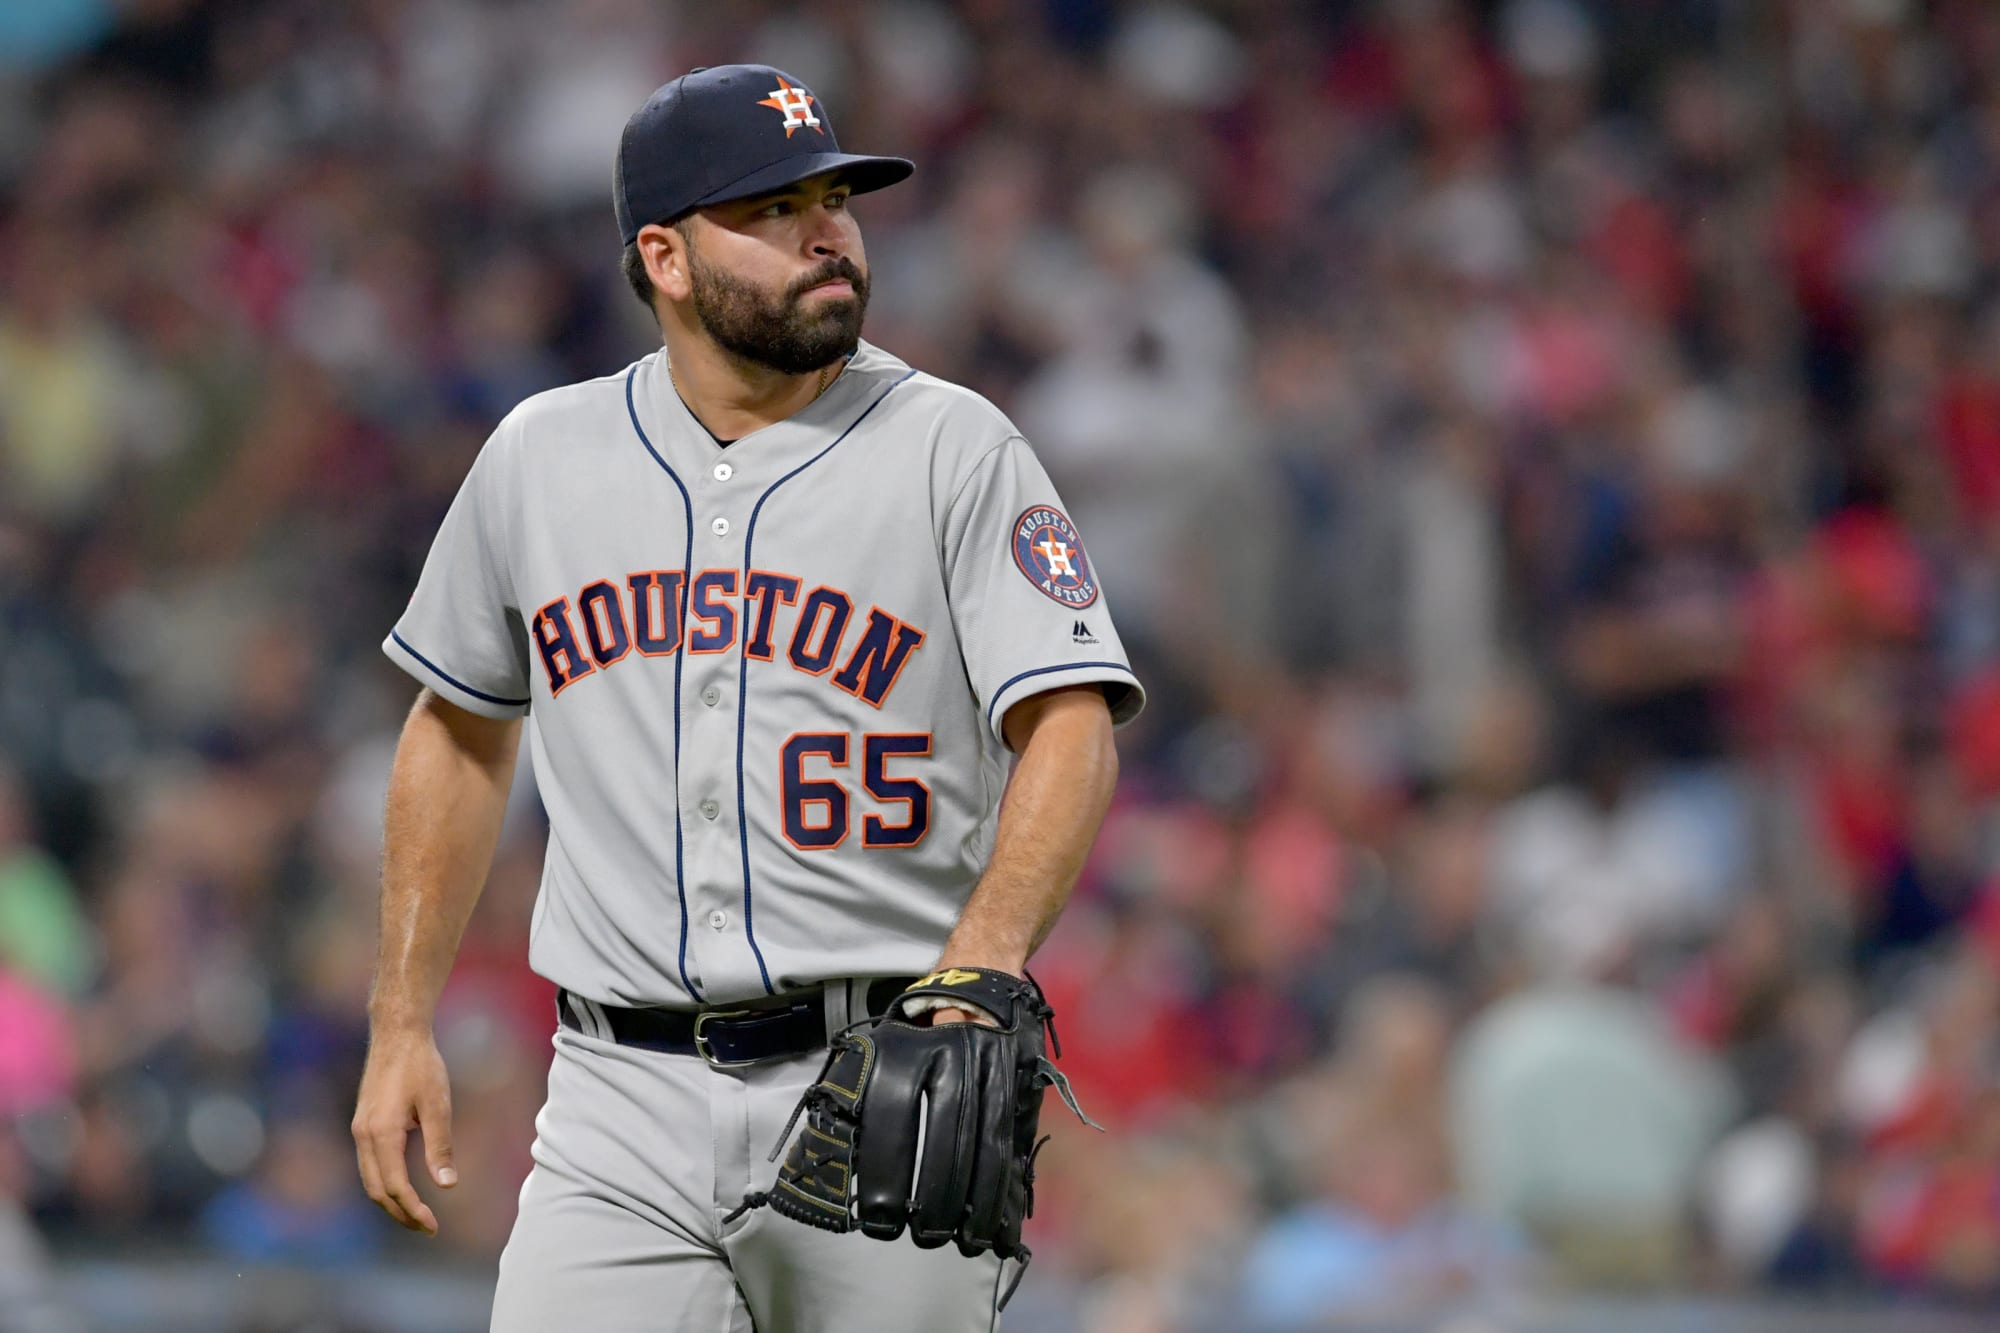 Houston Astros: Jose Urquidy should be the 4th starter in ALDS series